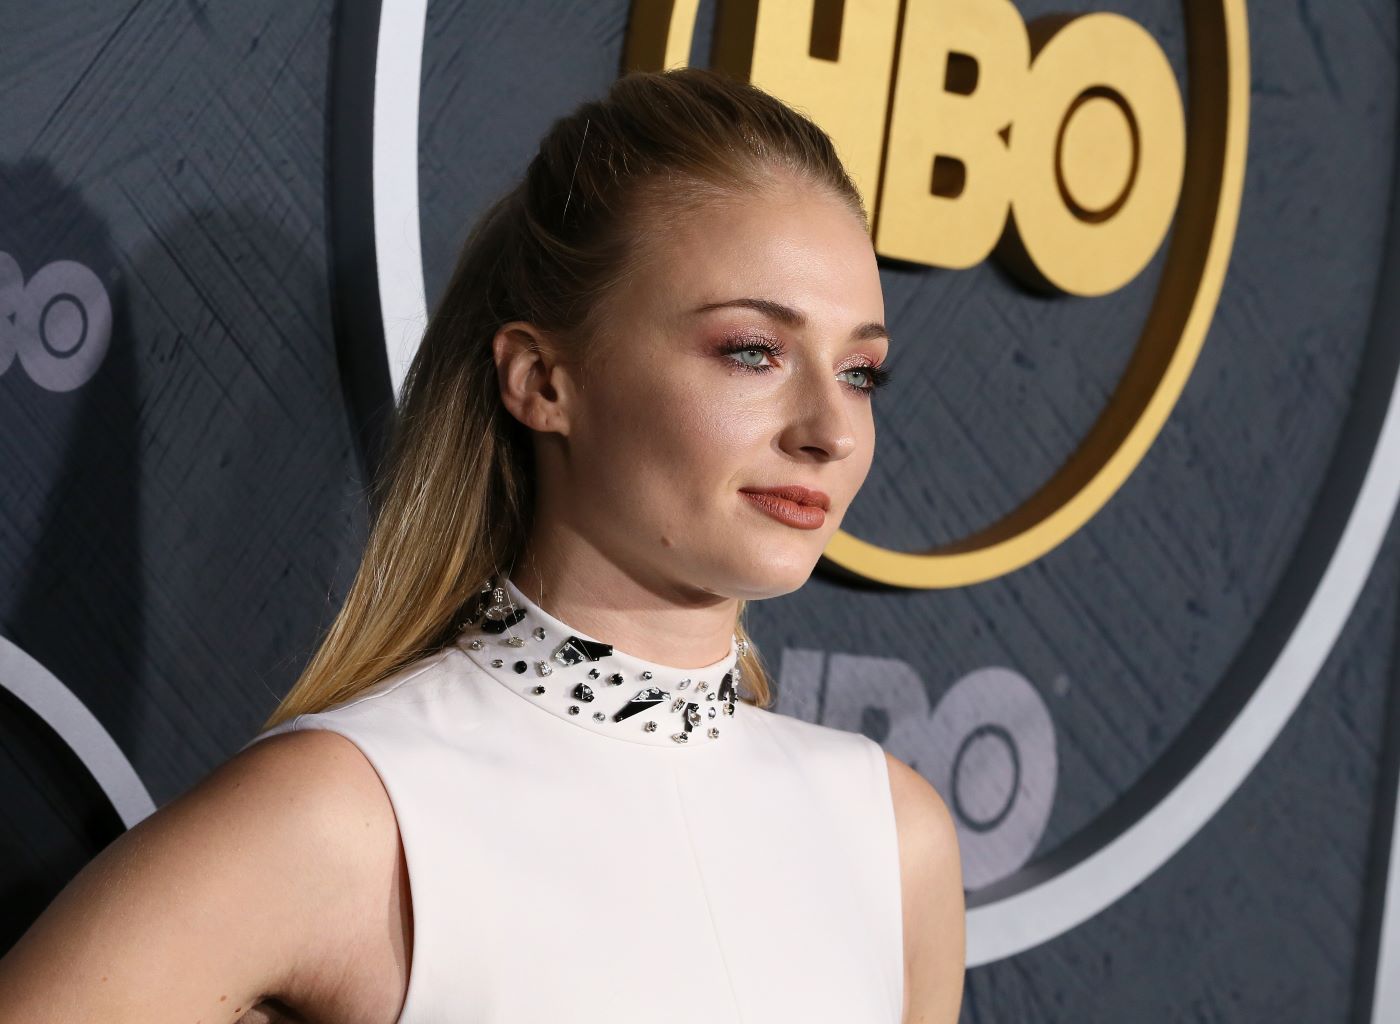 Sophie Turner is wearing a white high neck halter top dress with grey embellishments around the neck. She is standing in front of a black background with the HBO logo in gold.